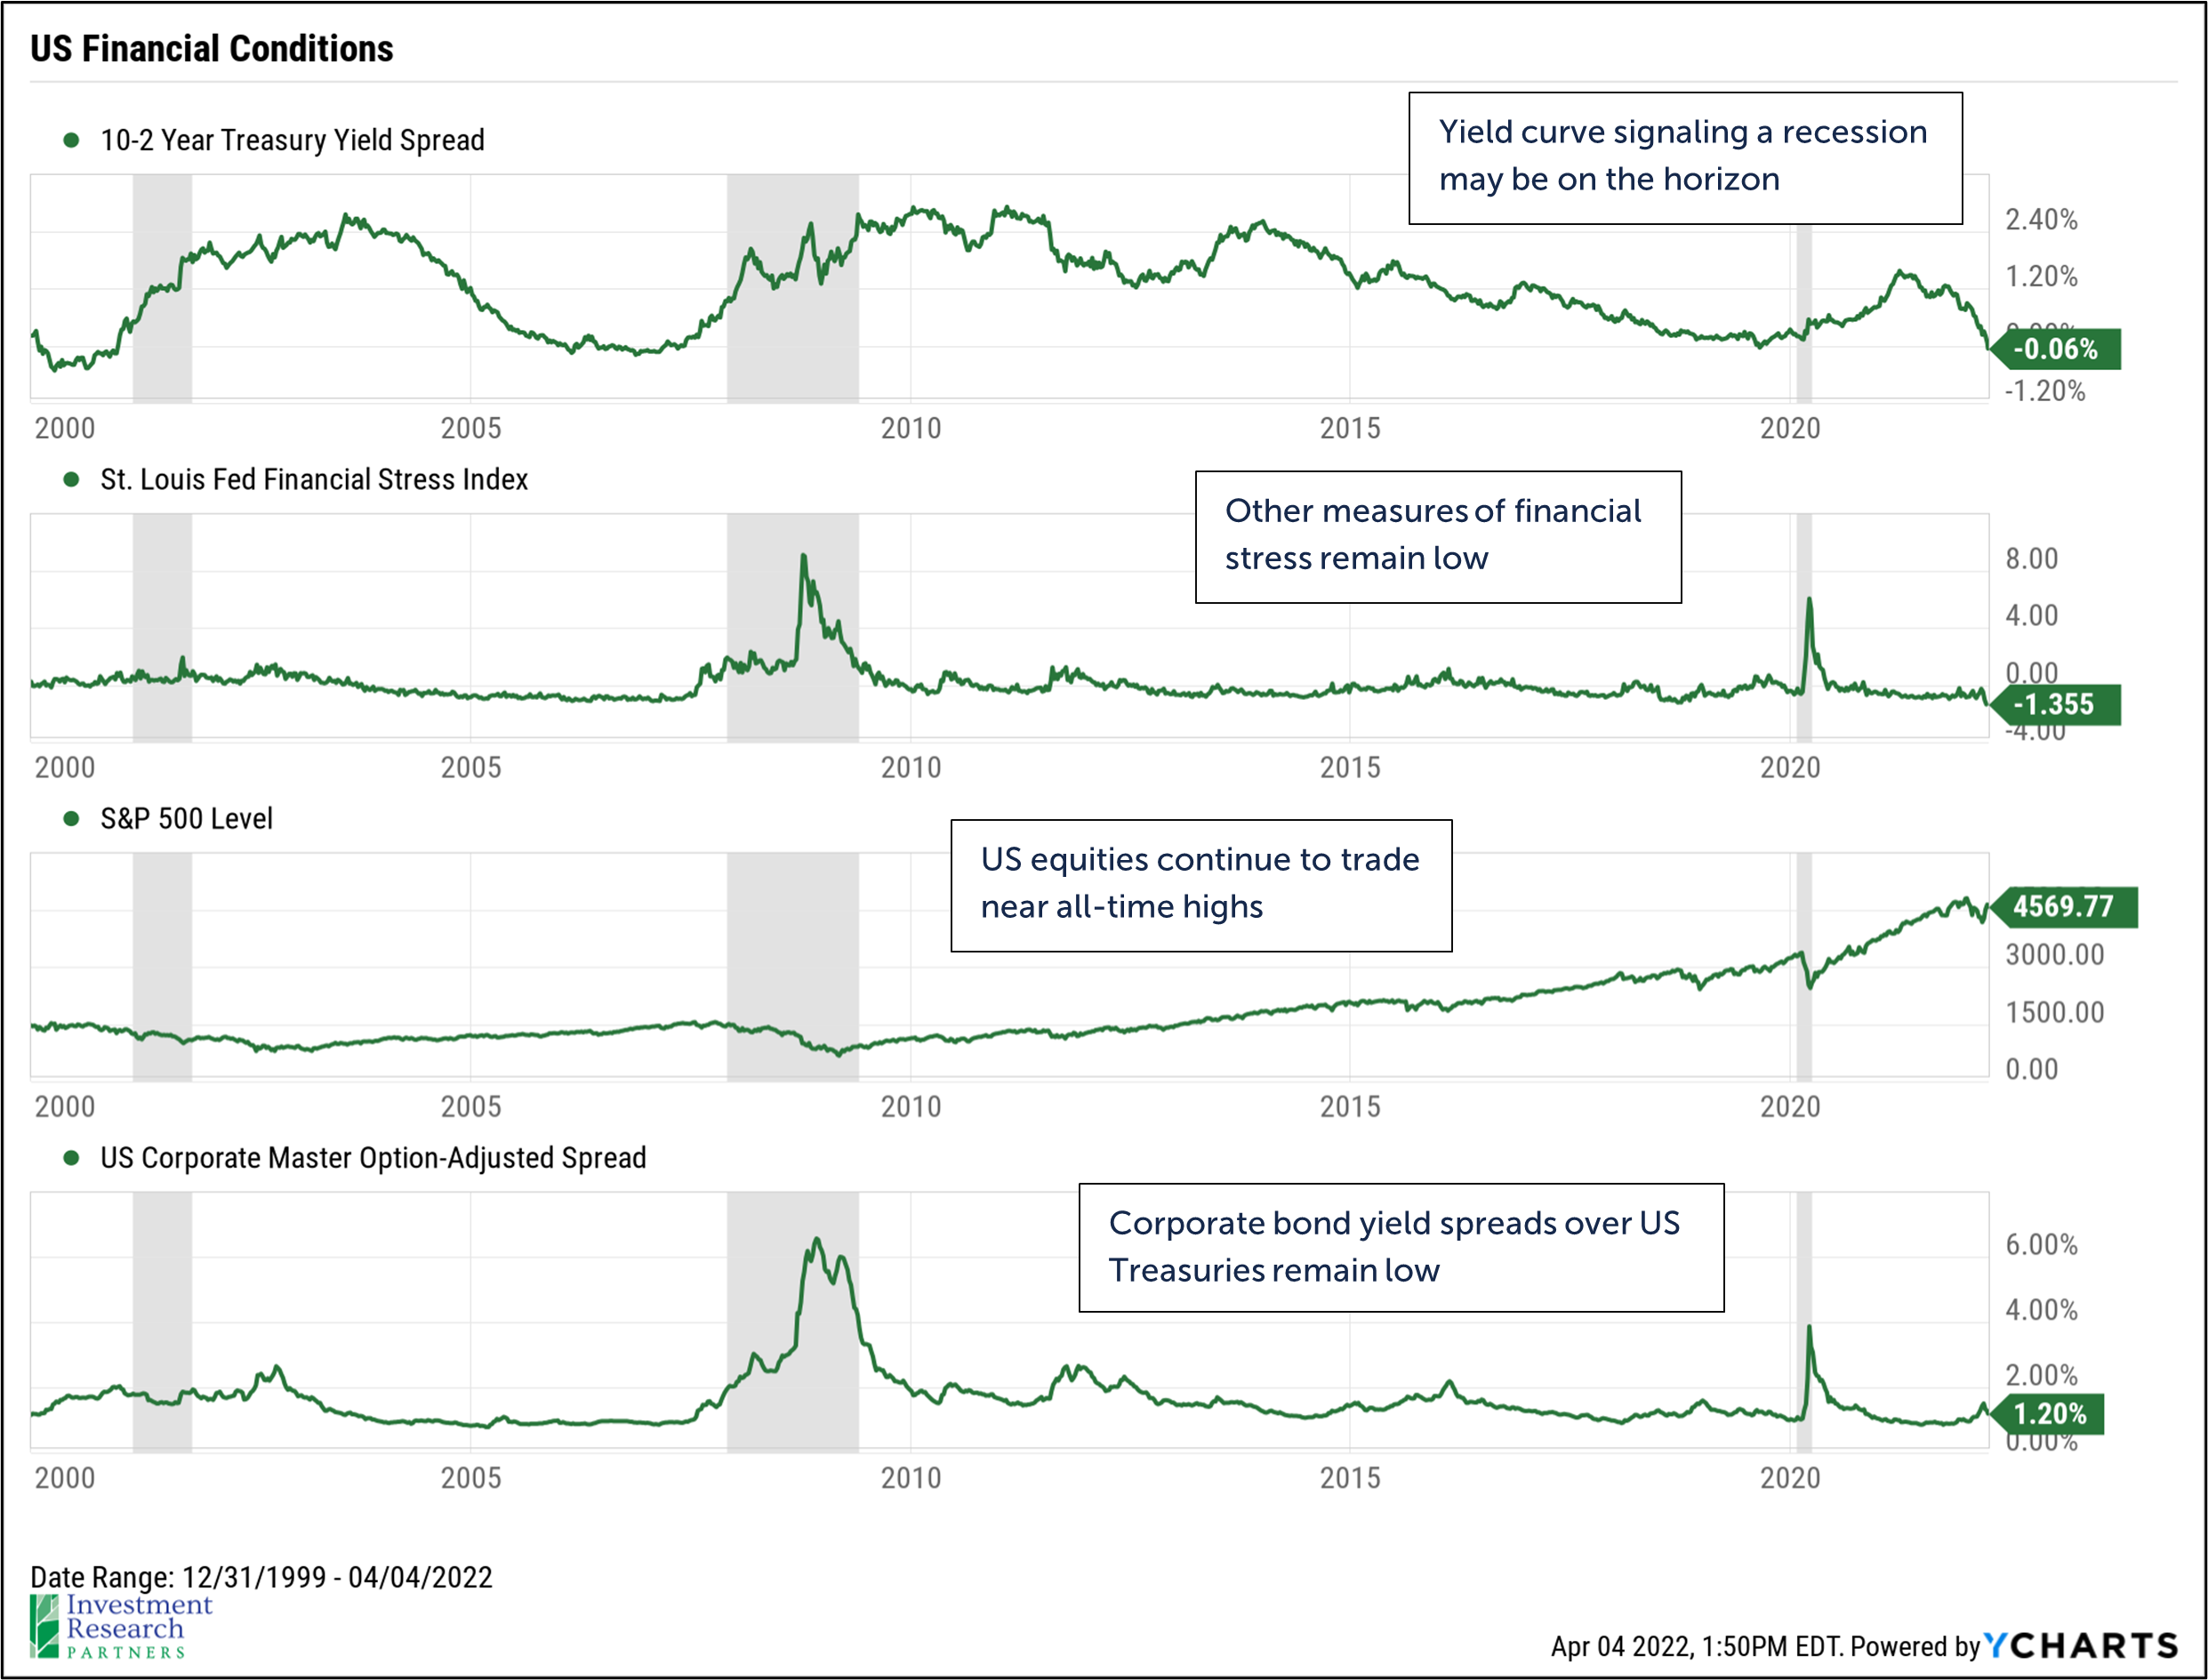 Line graphs depicting US Financial Conditions, including 10-2 Year Treasury Yield Spread, St Louis Fed Financial Stress Index, S&P 500 Level, and US Corporate Master Option-Adjusted Spread